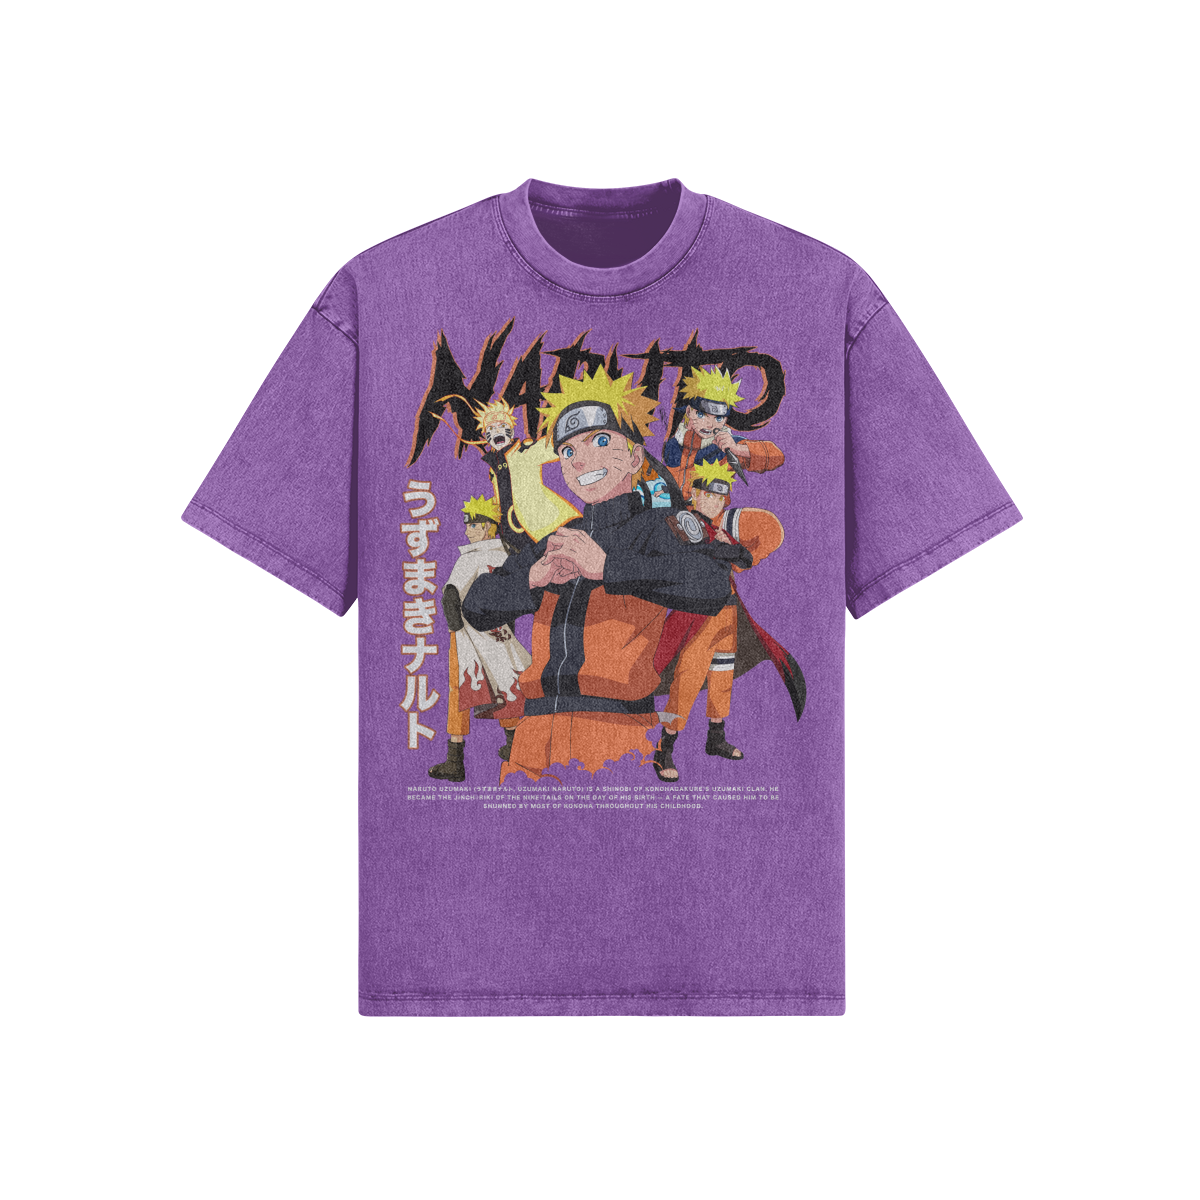 Naruto "All Forms" Vintage